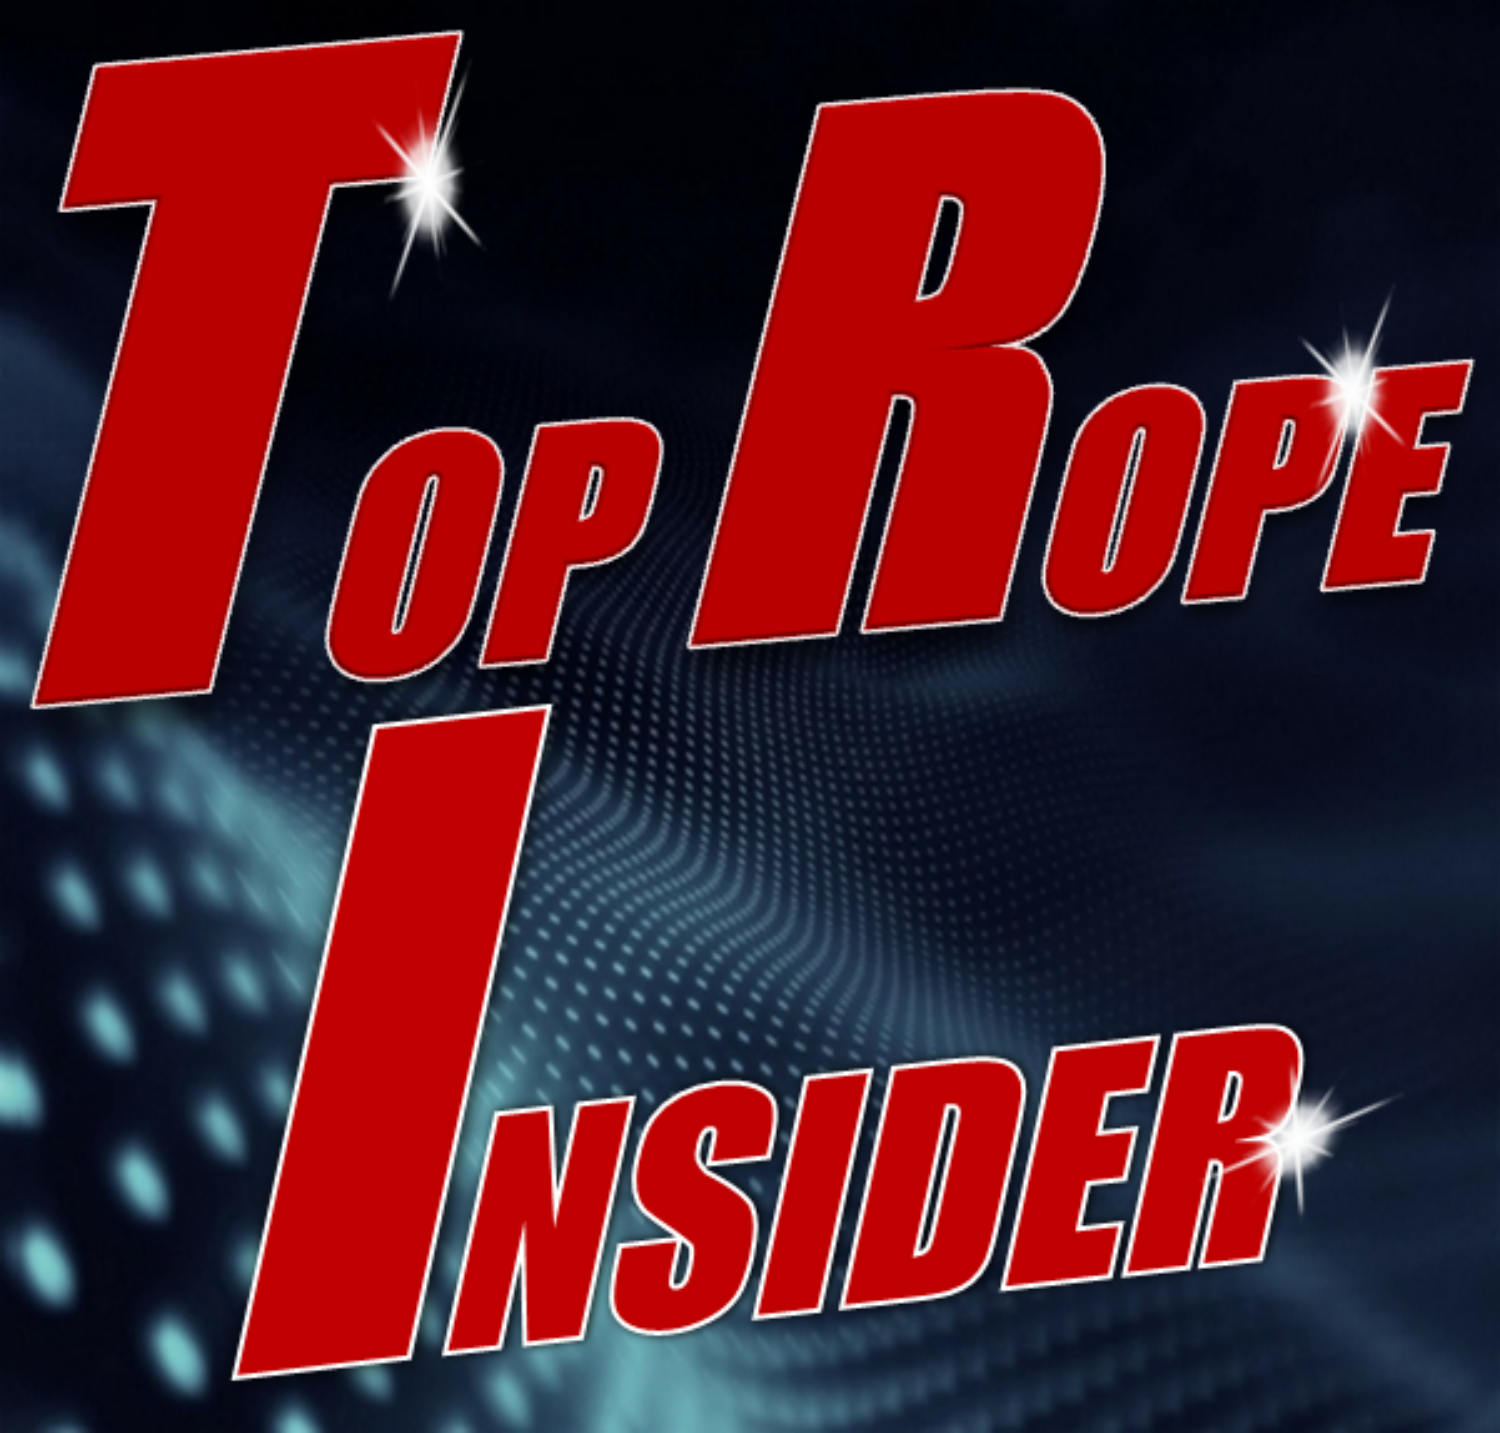 Top Rope Insider